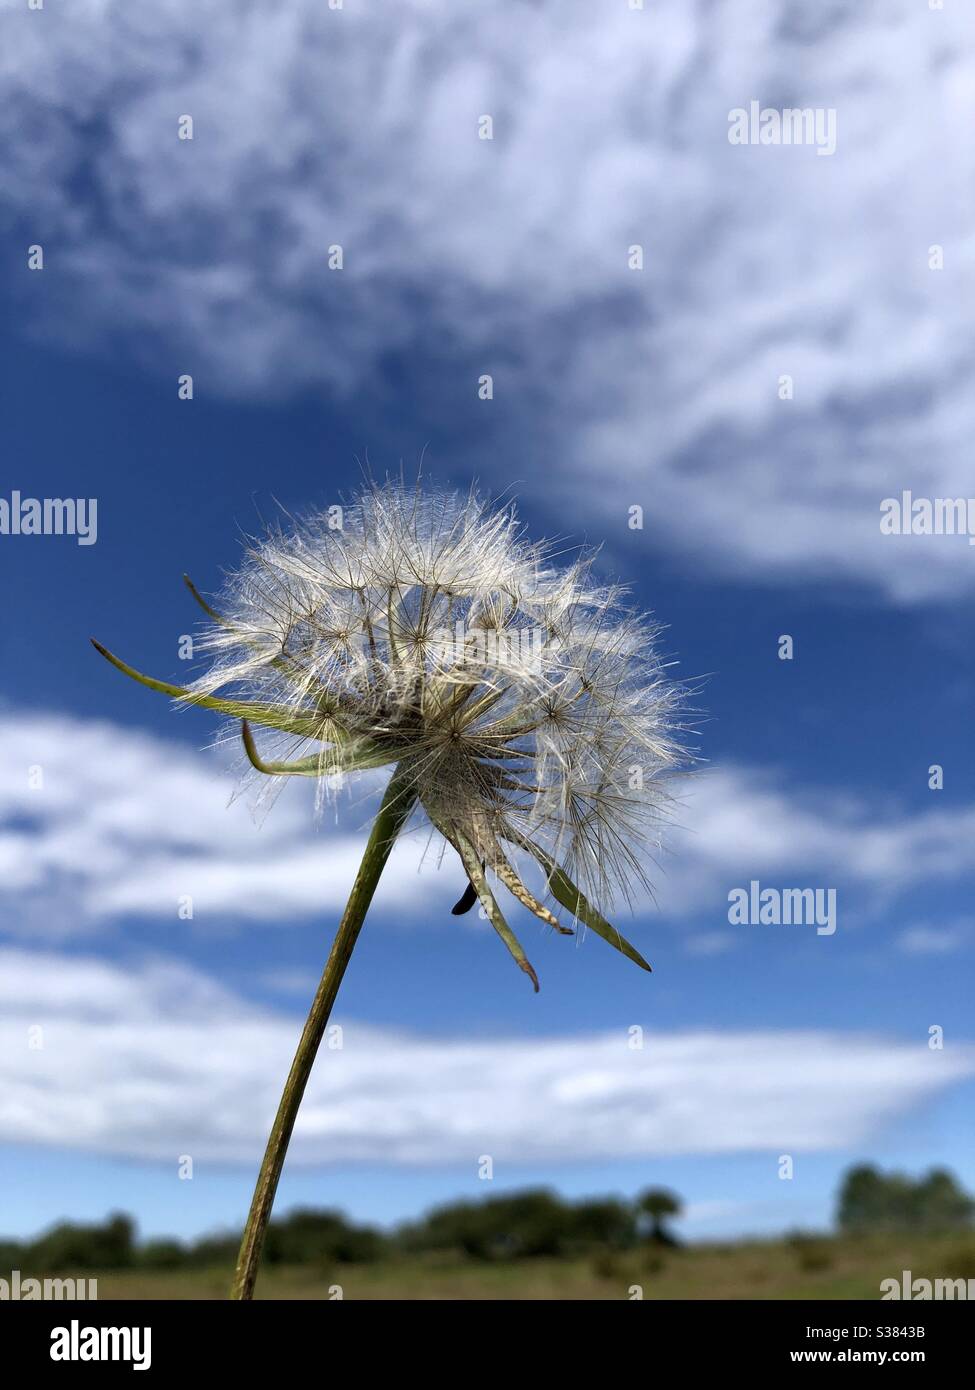 Goat’s-beard wild flower seed head against a blue sky with white clouds Stock Photo